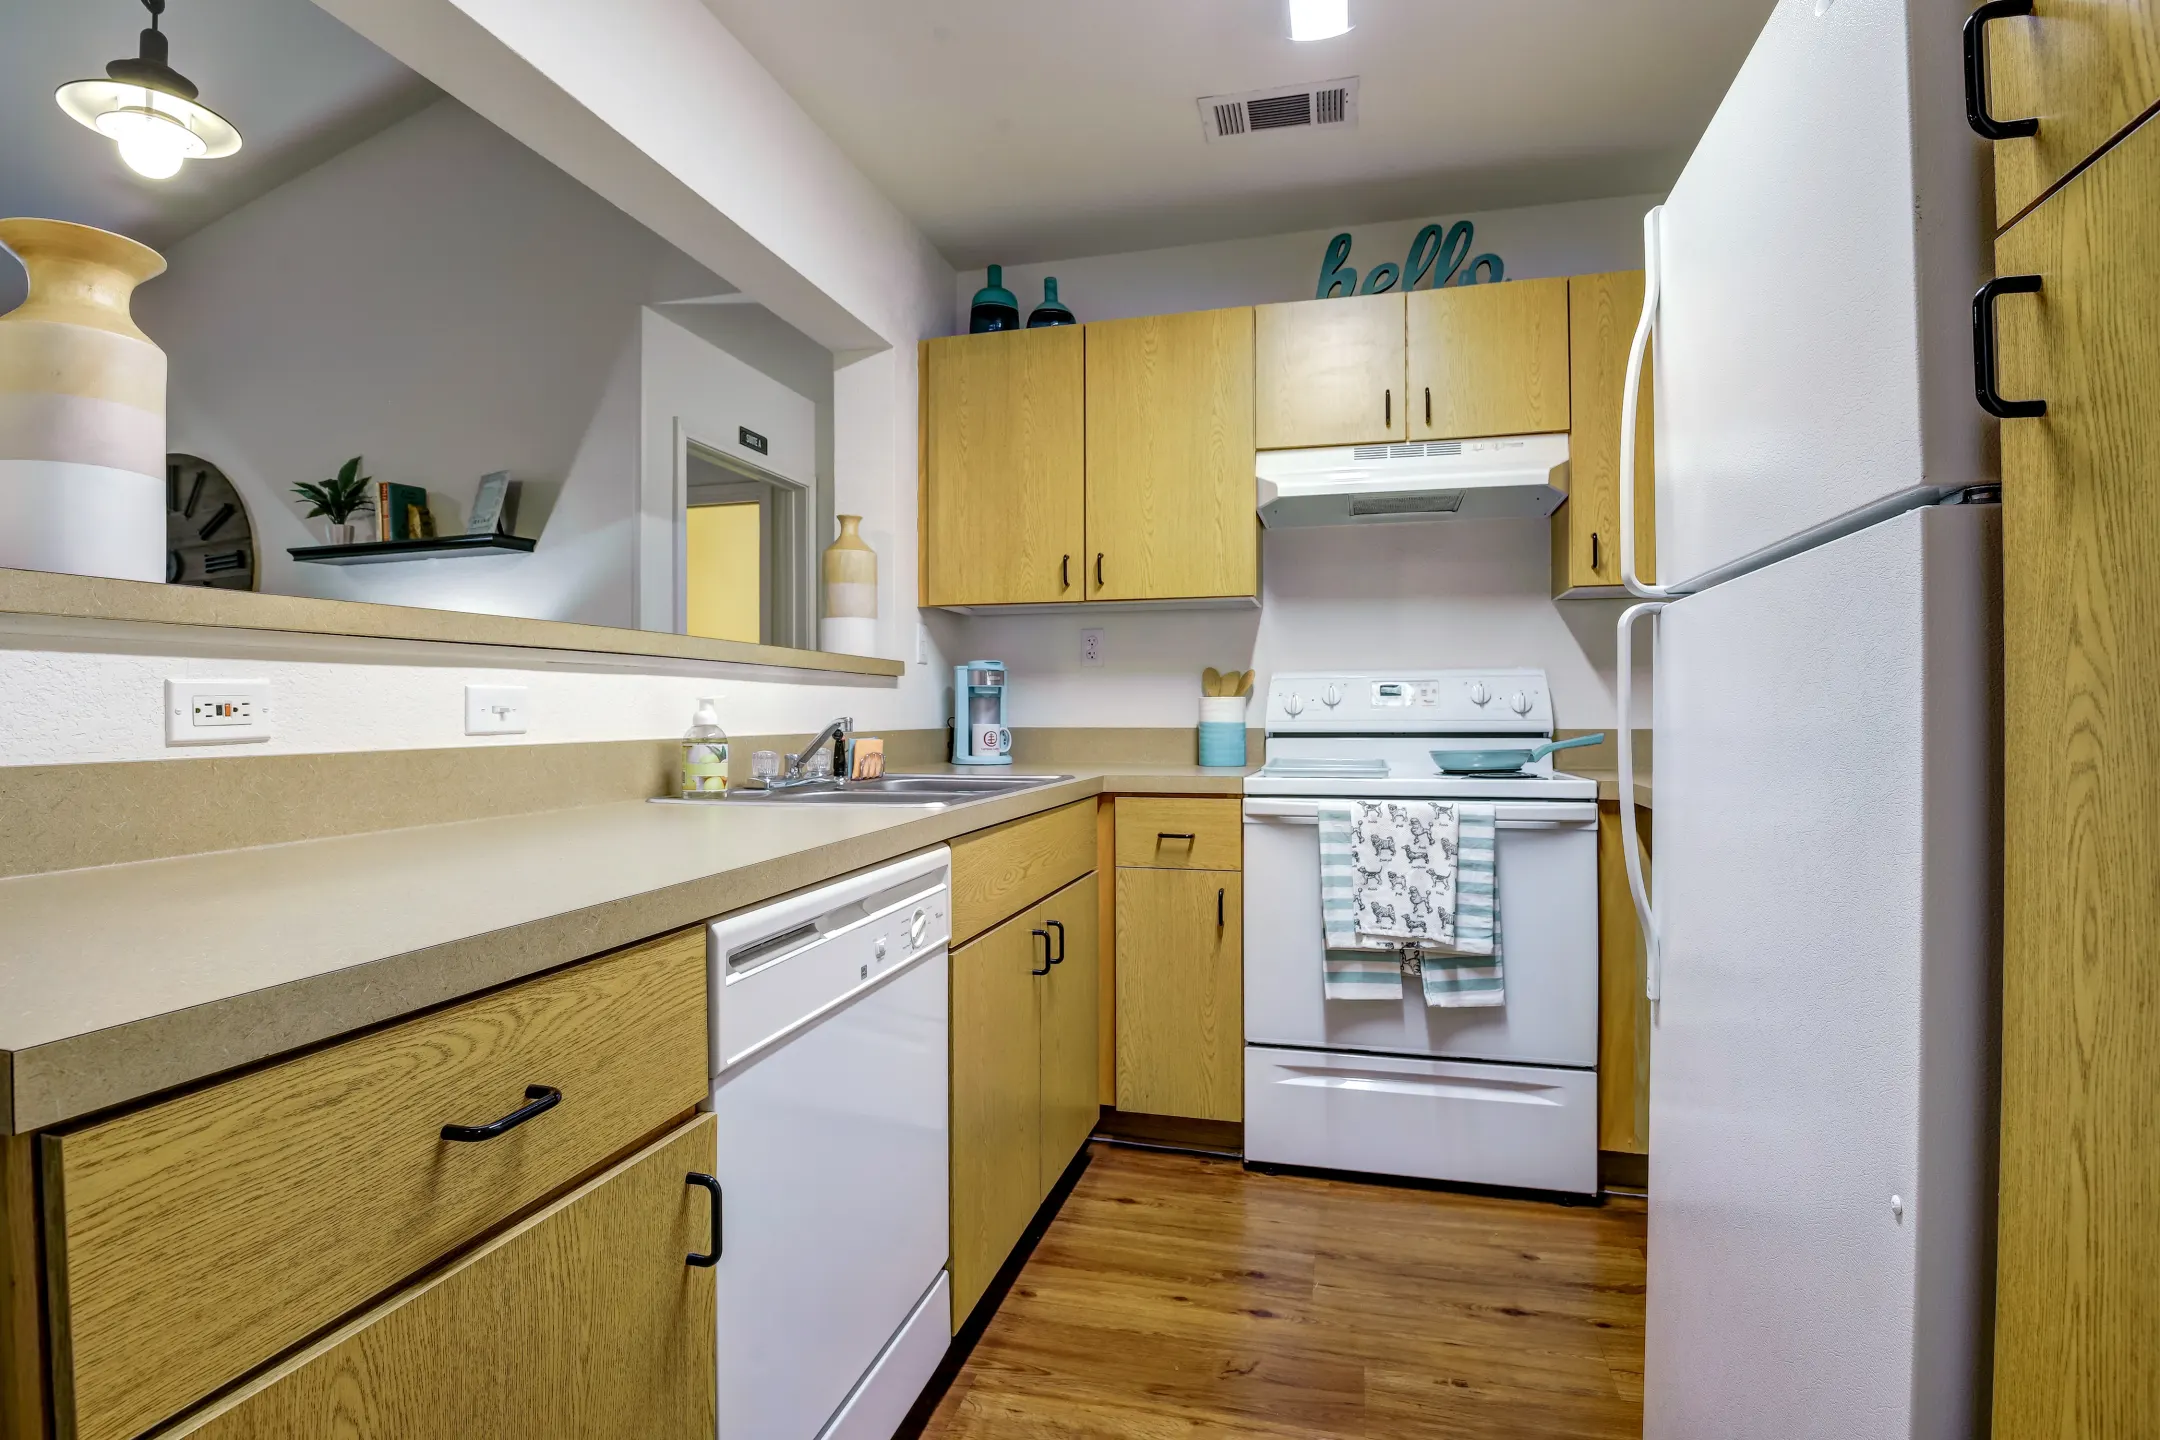 Kitchen - Campus Lodge - Per Bed Lease - Norman, OK